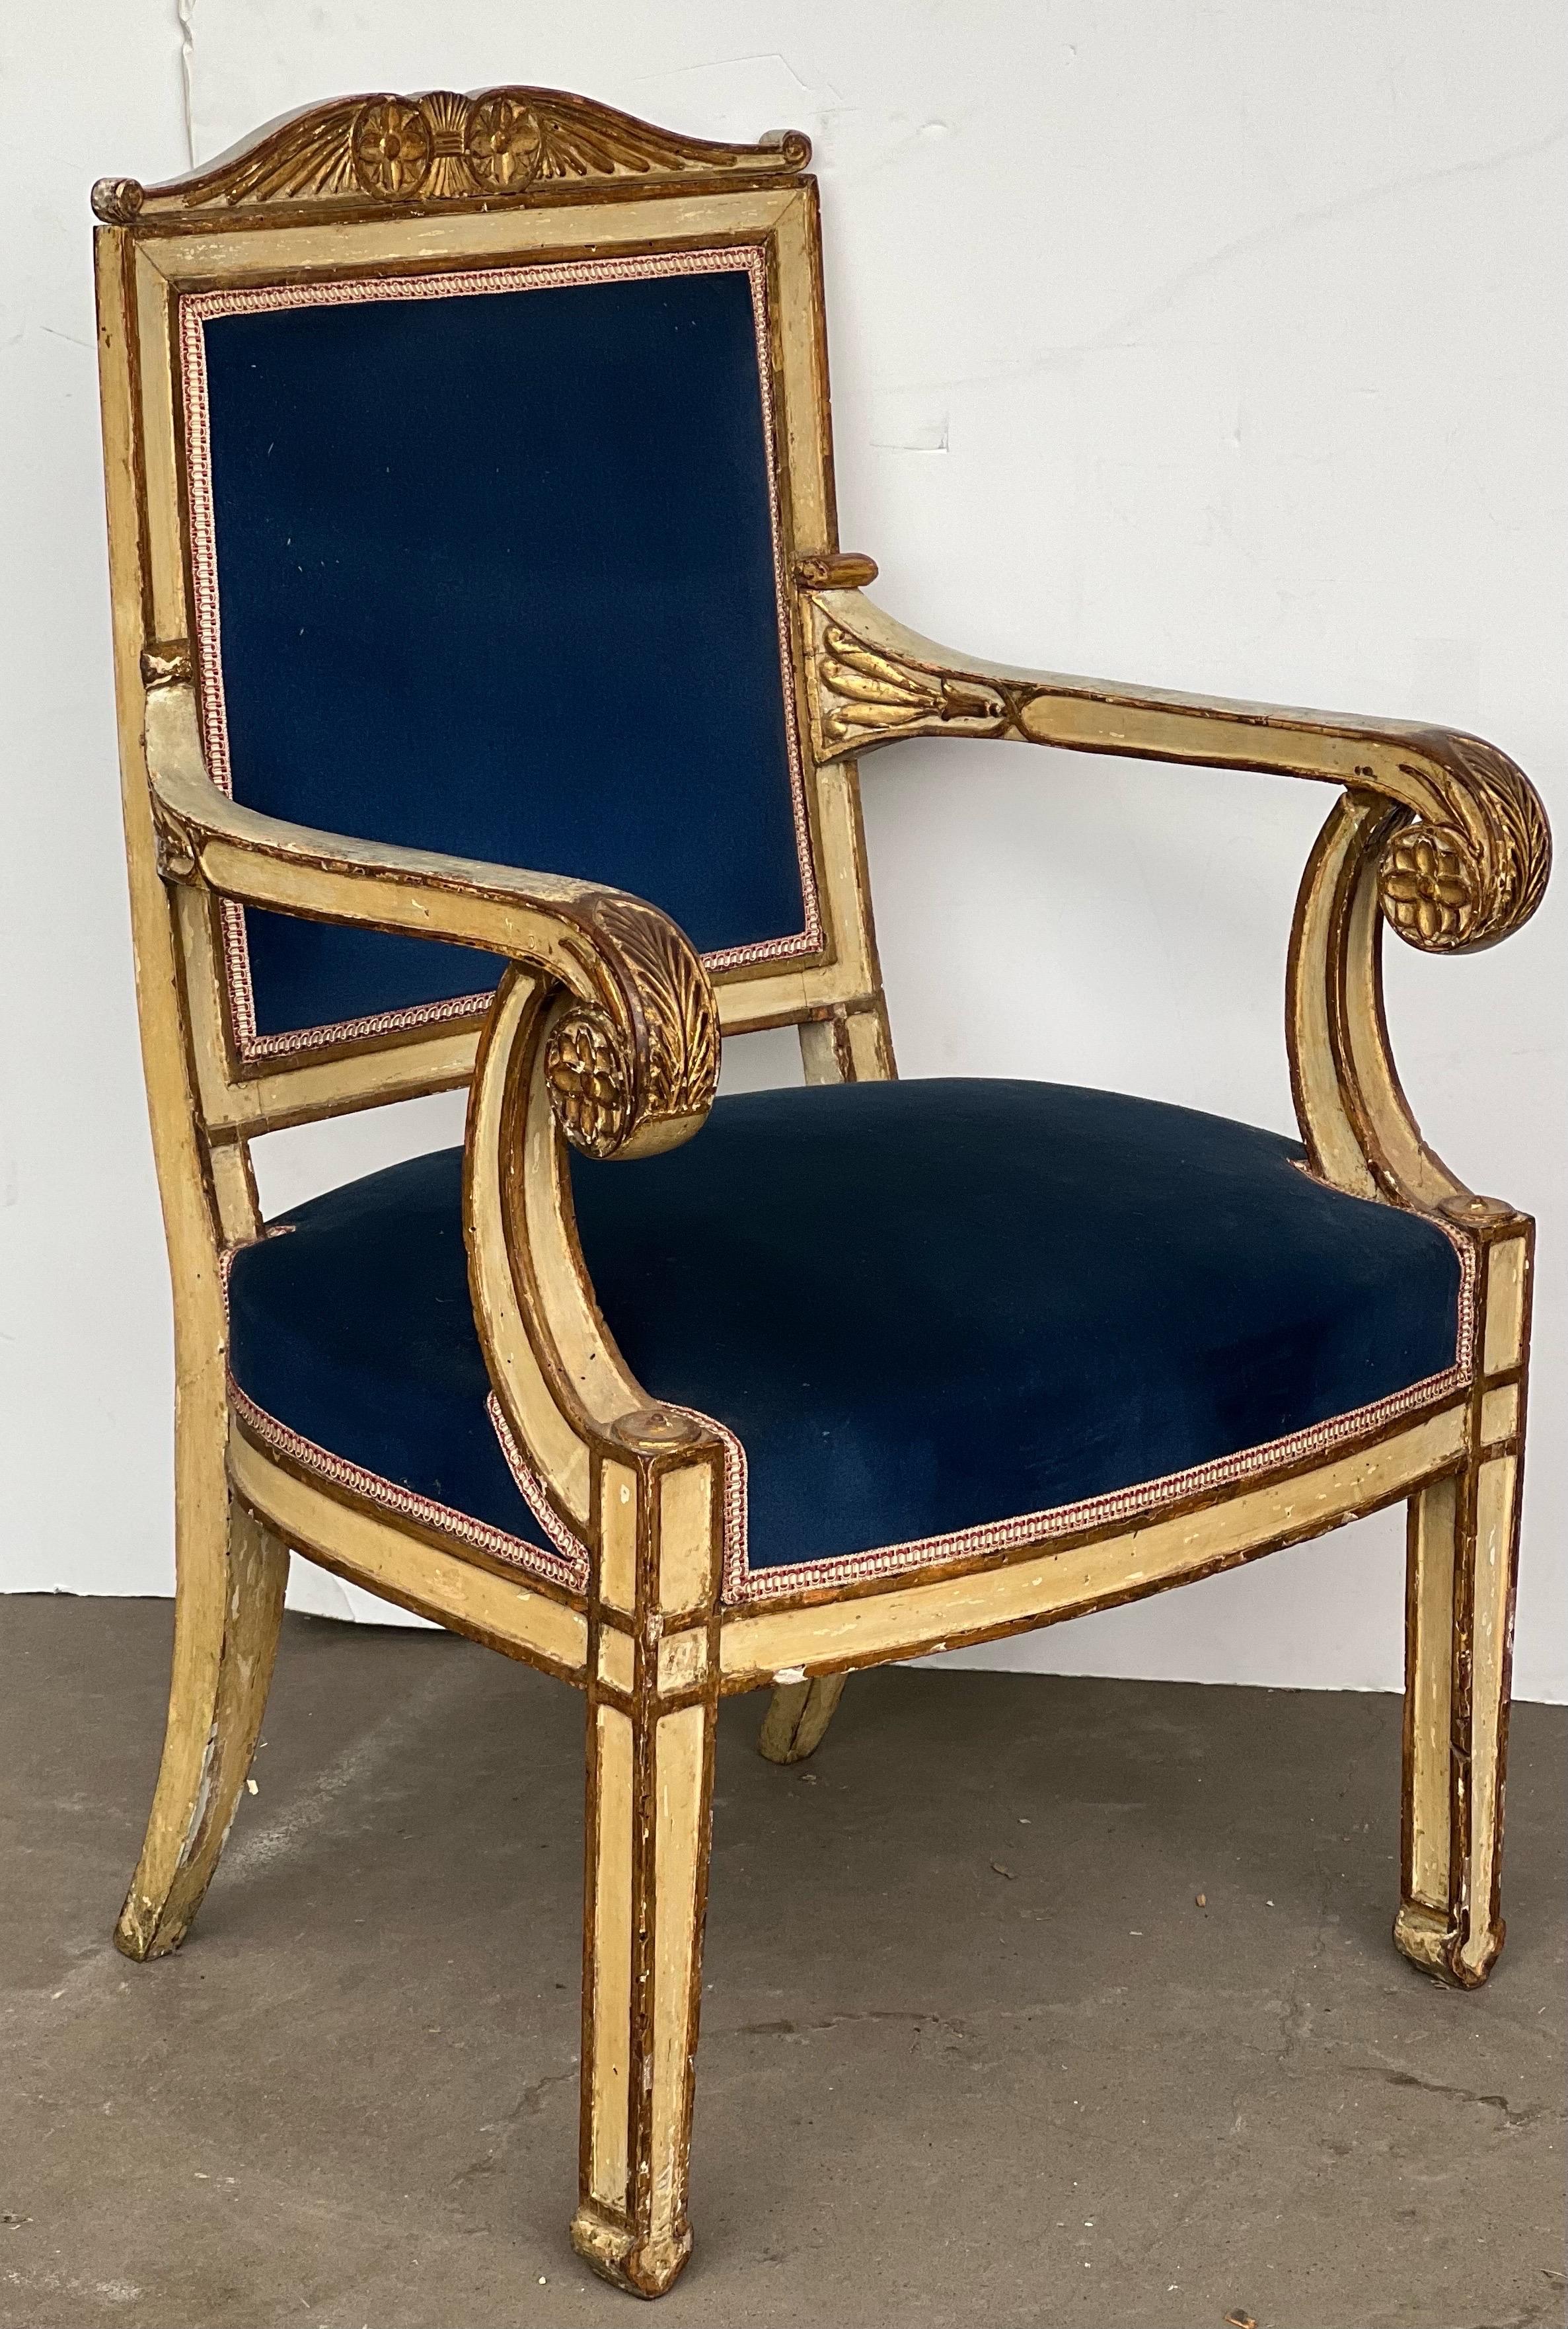 Here is a beautiful Empire chair that we purchased in Naples, Italy. This is a classic style, with a fun pop of color with blue velvet that can be left as is or can be reupholstered to your liking. The patina and gold gilt are to die for that is